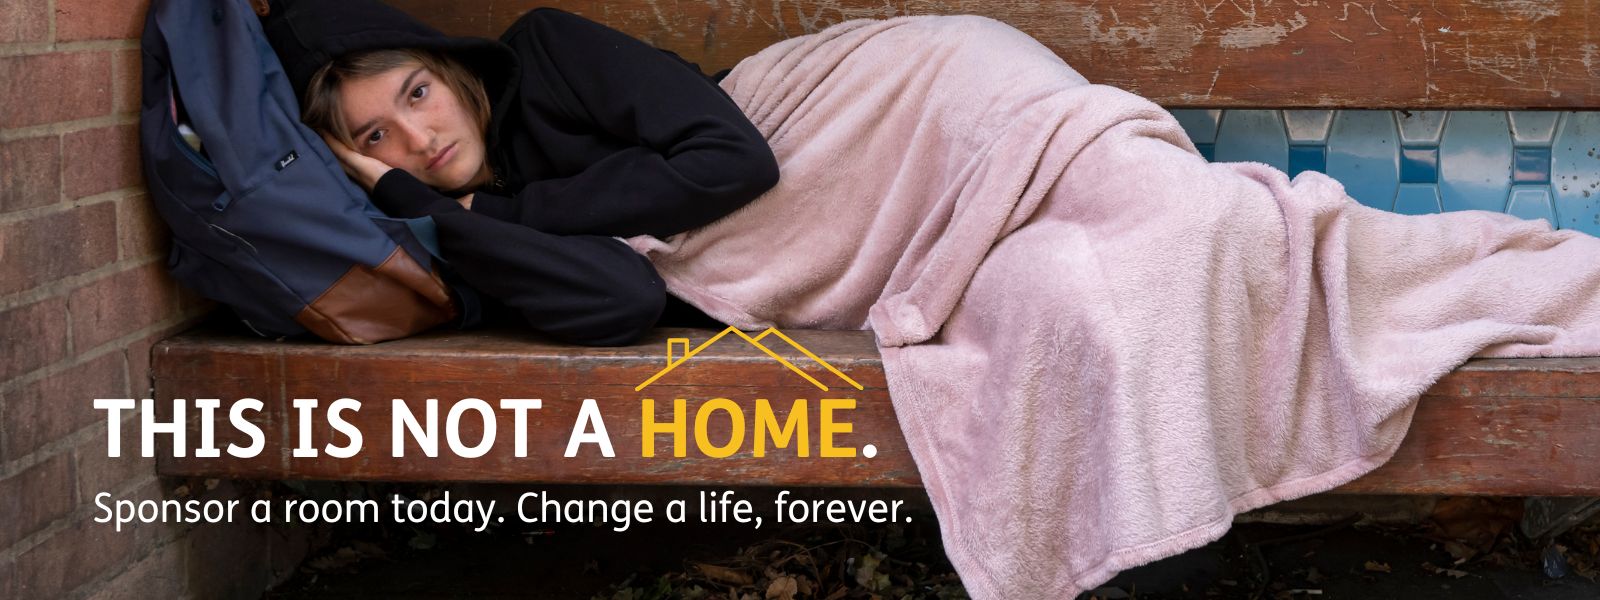 Sponsor a room today - change a life forever